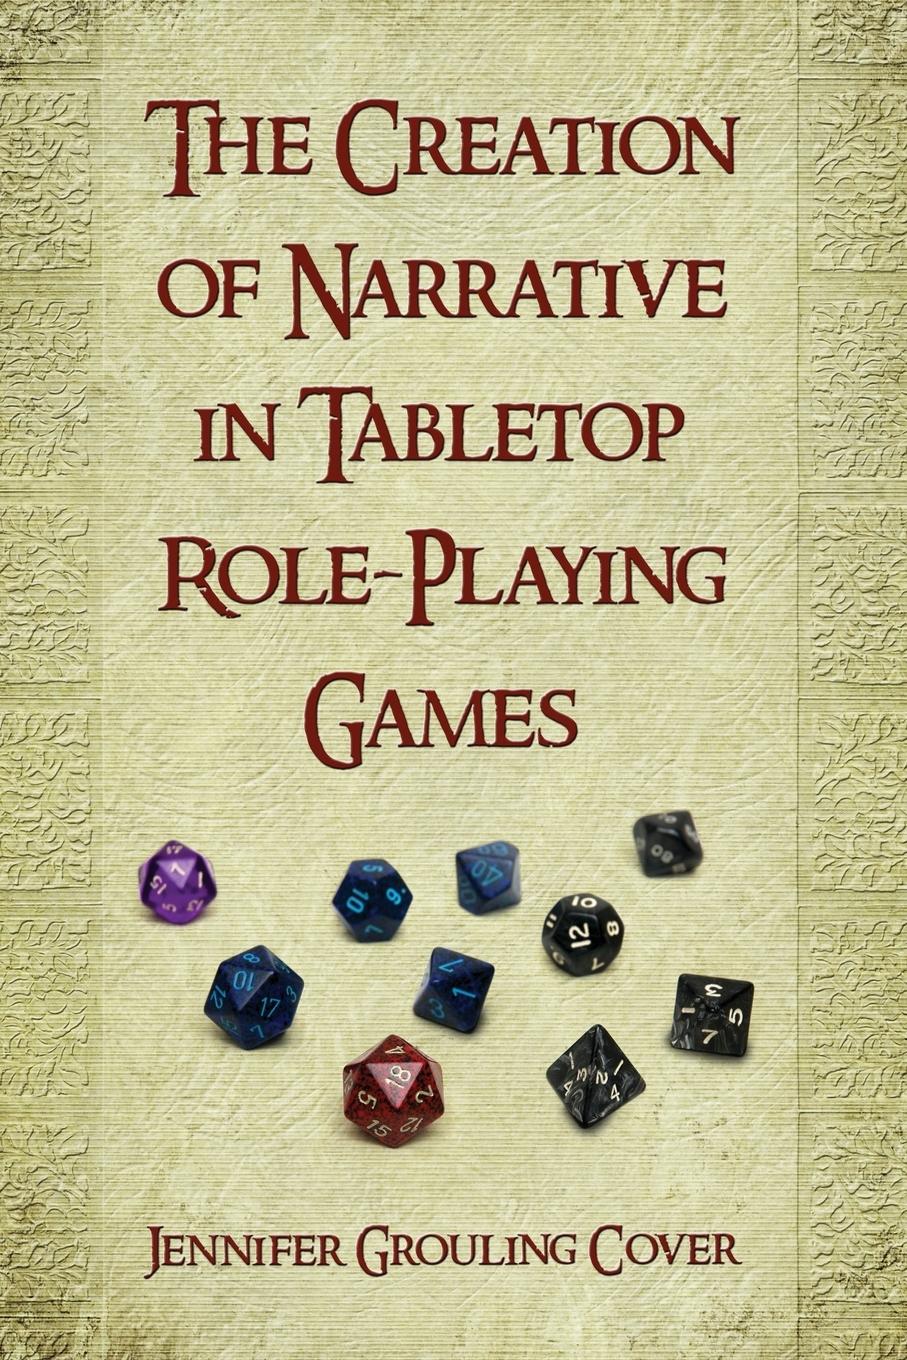 Creation of Narrative in Tabletop Role-Playing Games - Cover, Jennifer Grouling